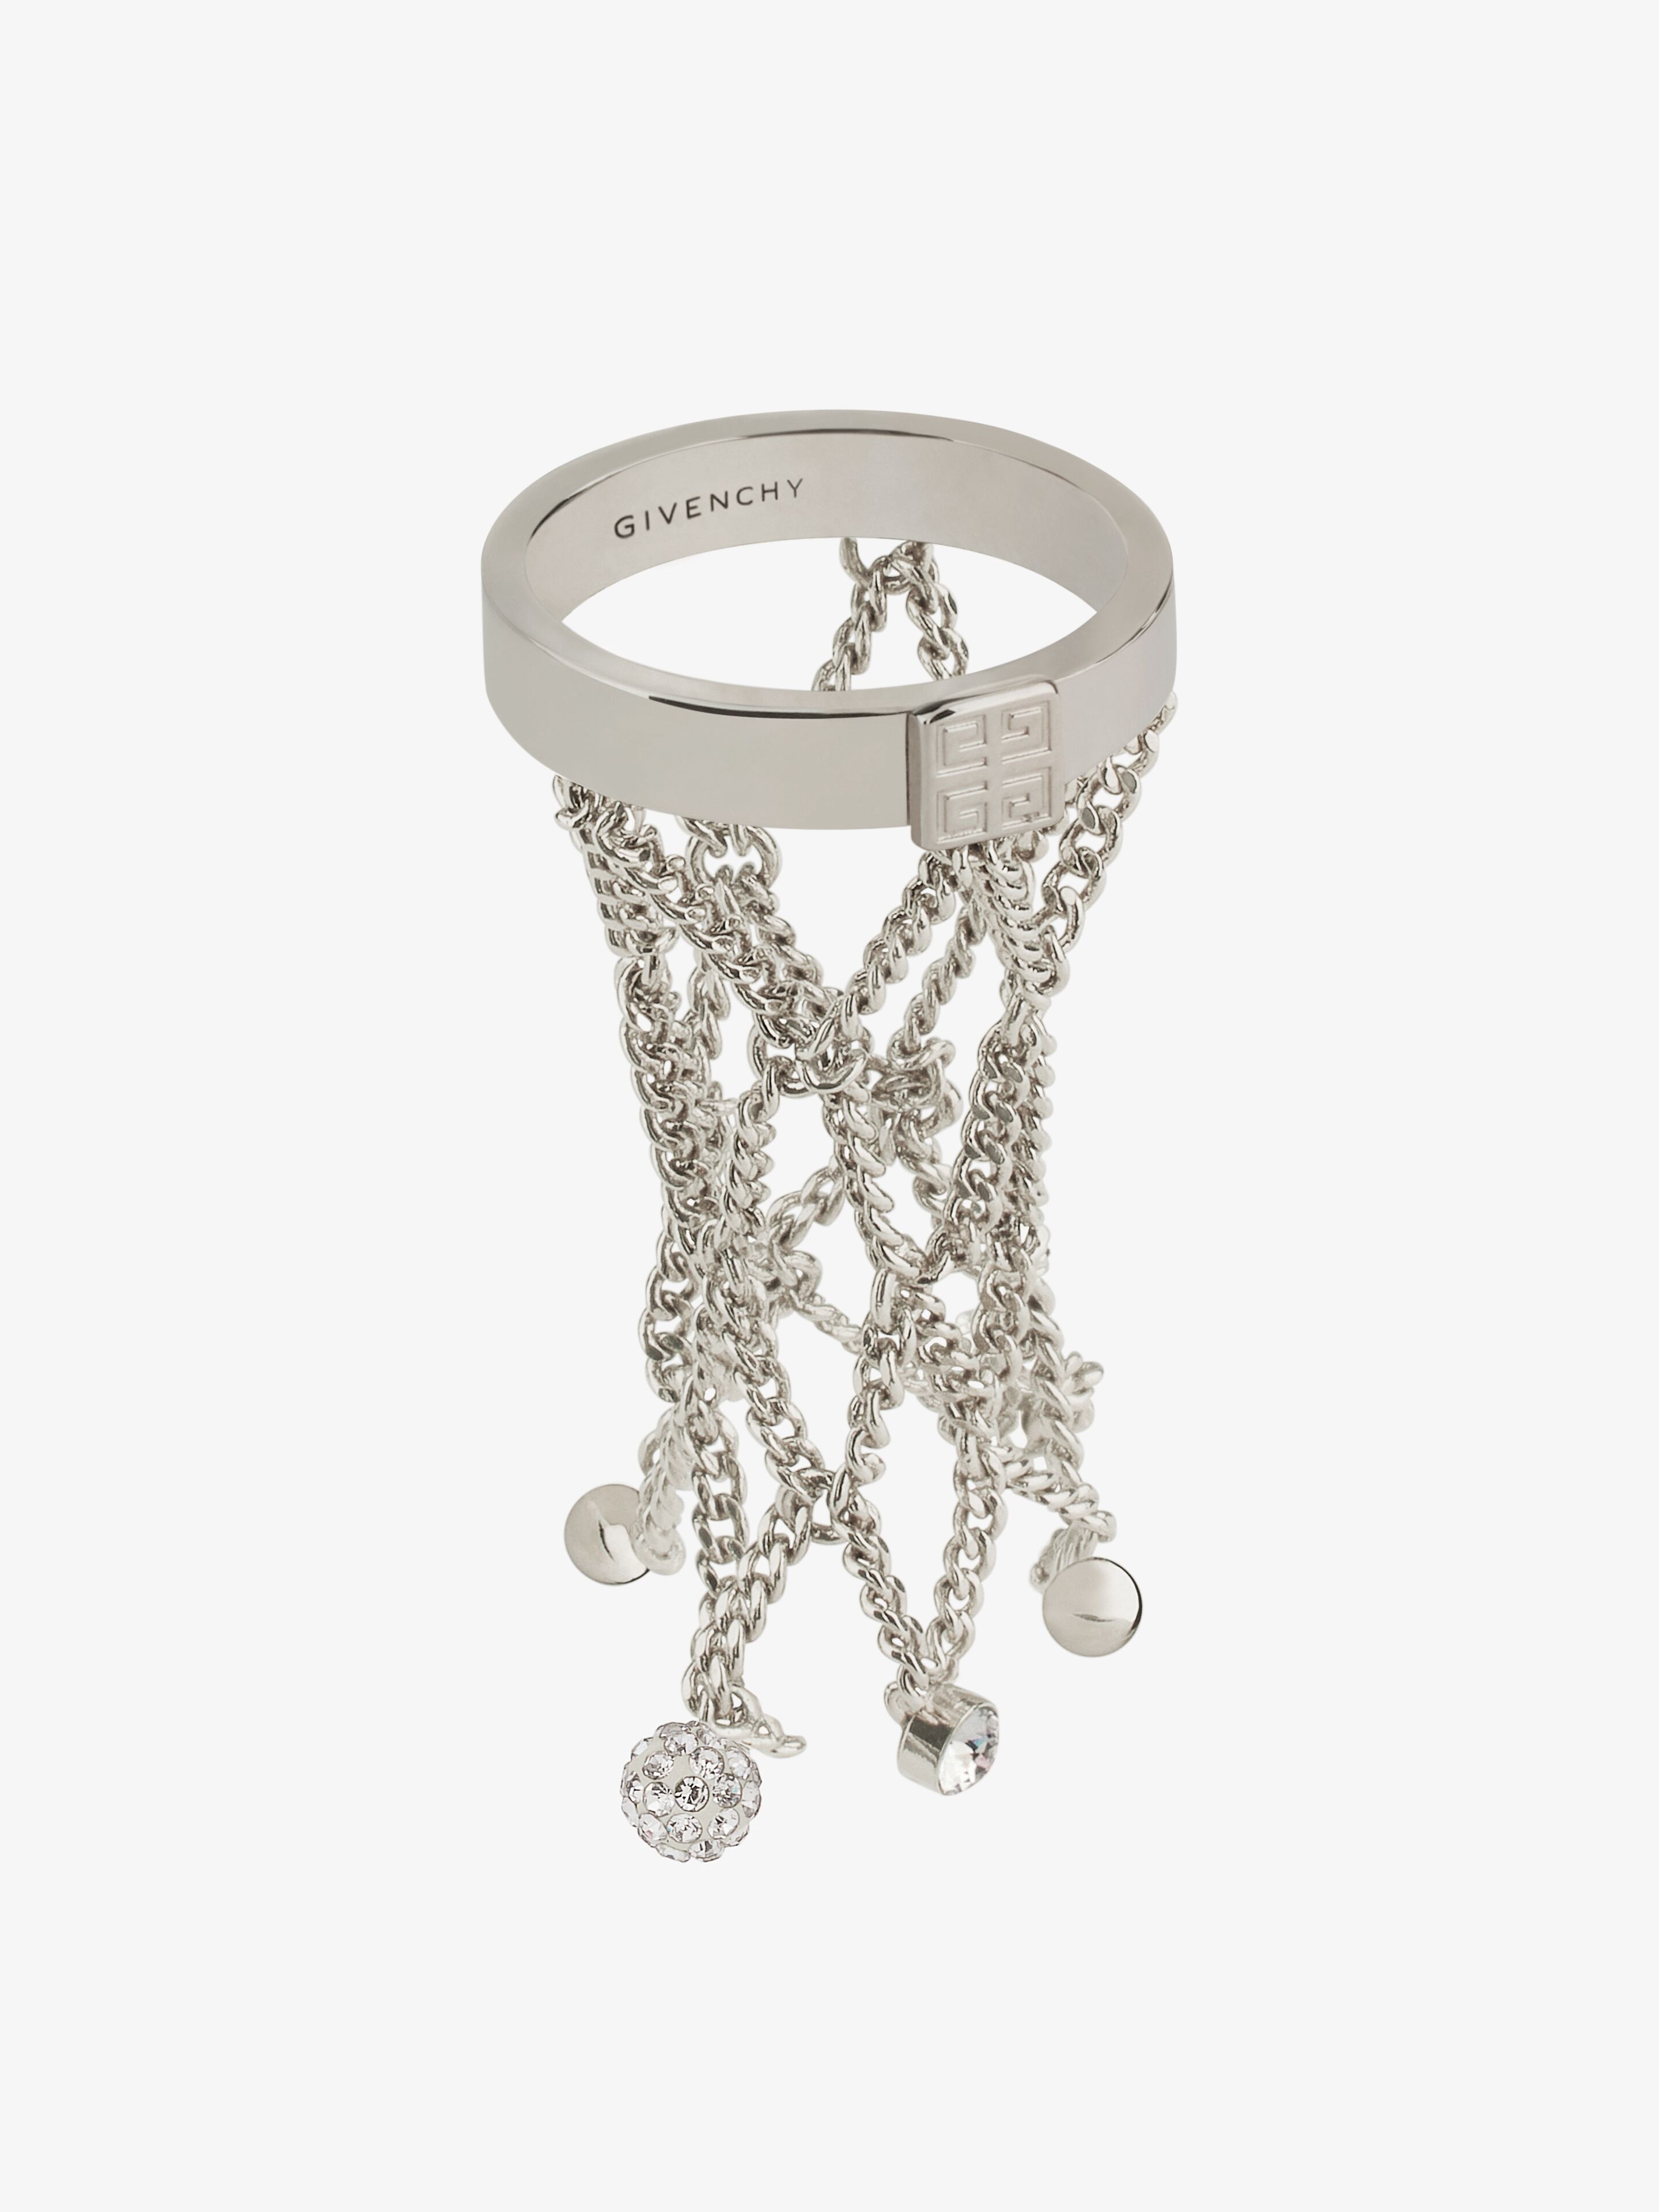 PEARLING RING IN METAL WITH PEARLS AND CRYSTALS - 4